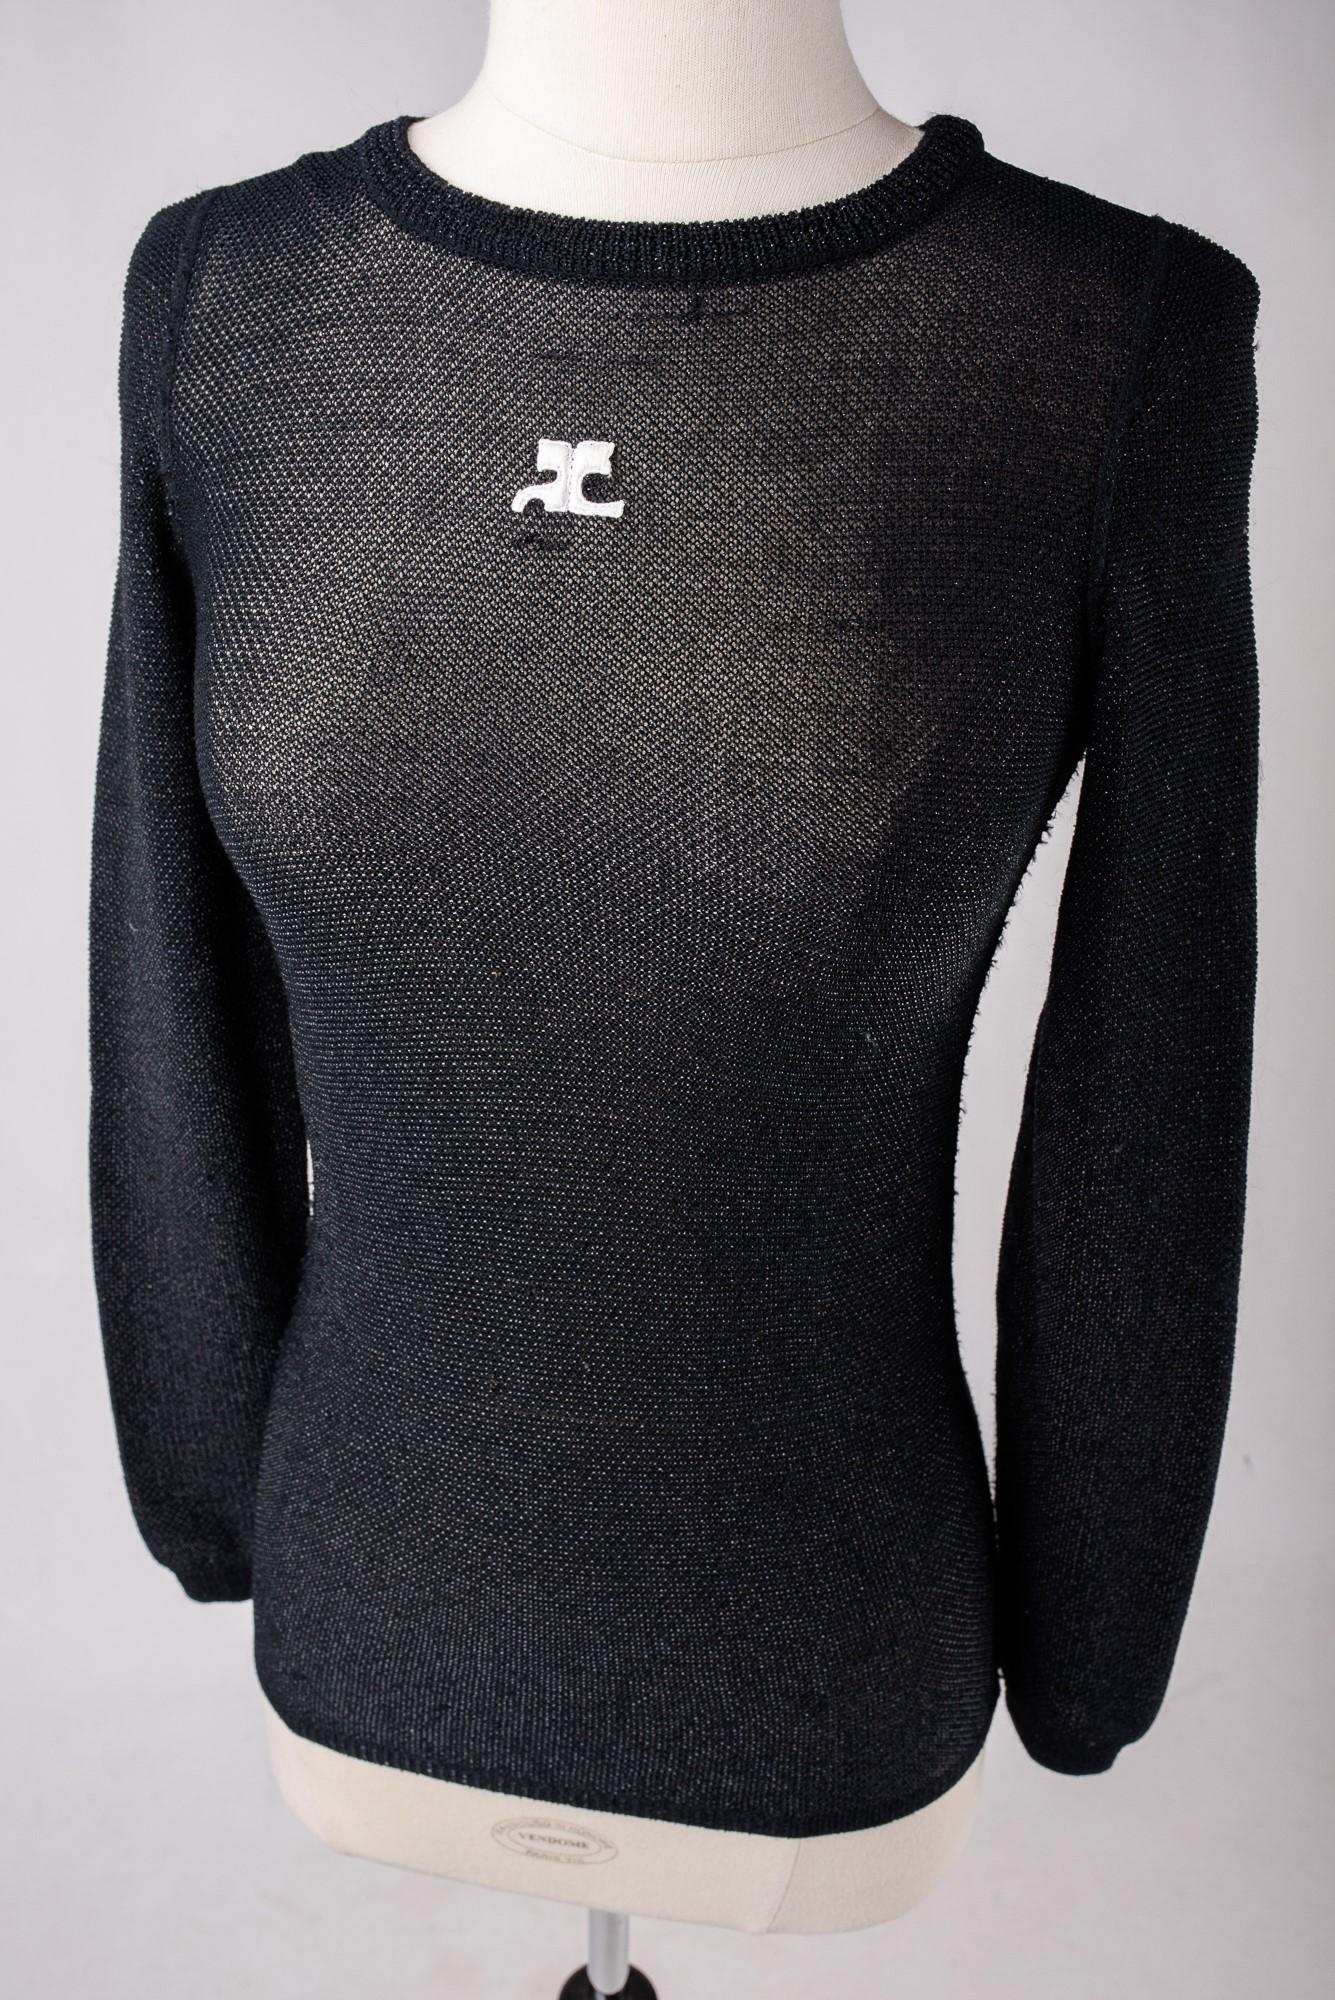 Circa 1970-1980
France

Beautiful black stretch jumper in polyamide wool knit and silver lurex lamé from the House of Courrèges, dating from the late 1970s. It has a tight fit, crew neck, long sleeves and the House logo in applied white silk. The